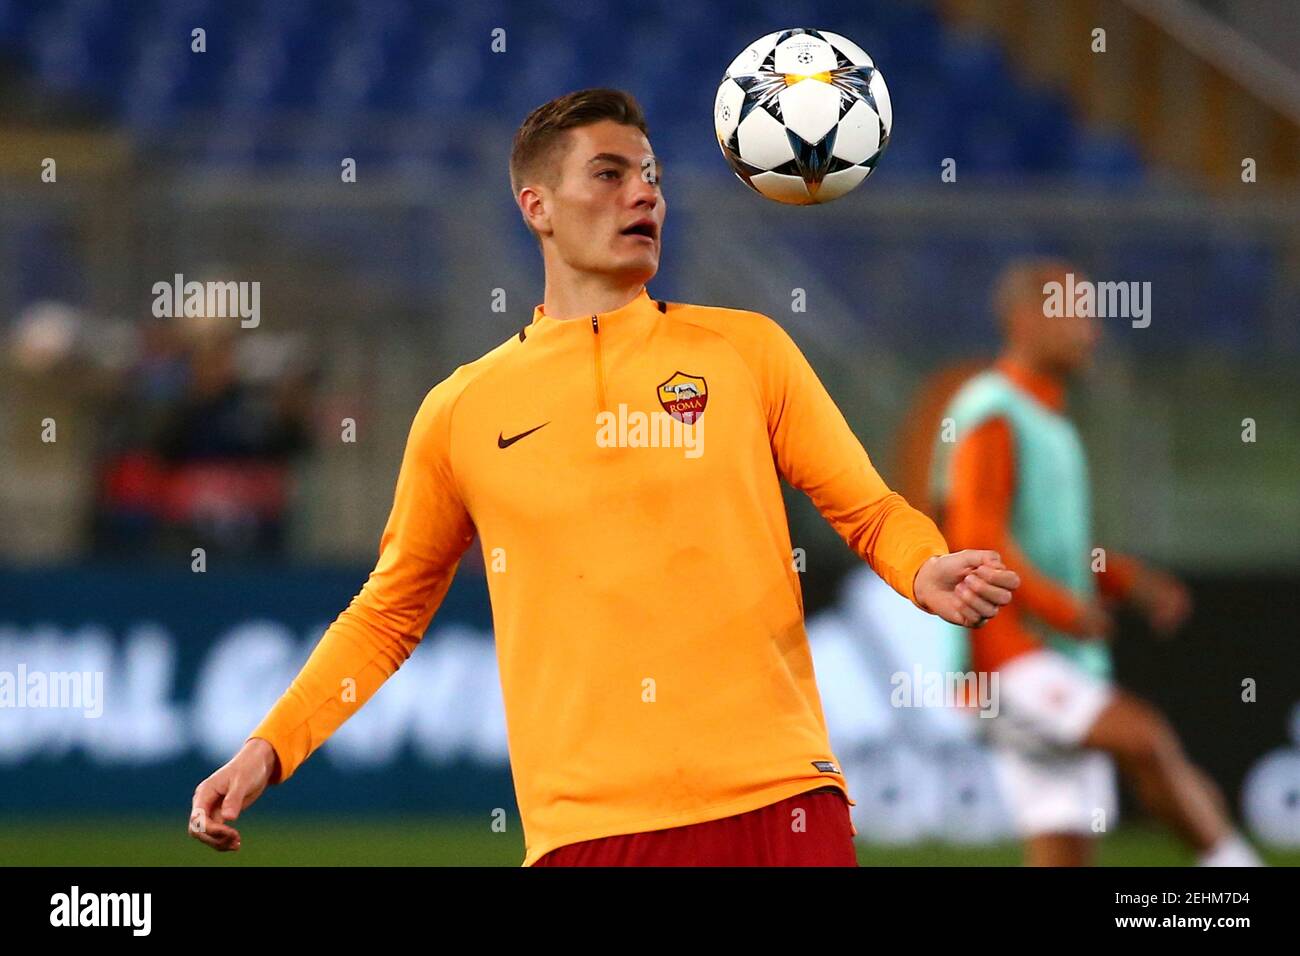 Soccer Football - Champions League Round of 16 Second Leg - AS Roma vs Shakhtar Donetsk - Stadio Olimpico, Rome, Italy - March 13, 2018   Roma's Patrik Schick warms up before the match    REUTERS/Alessandro Bianchi Stock Photo